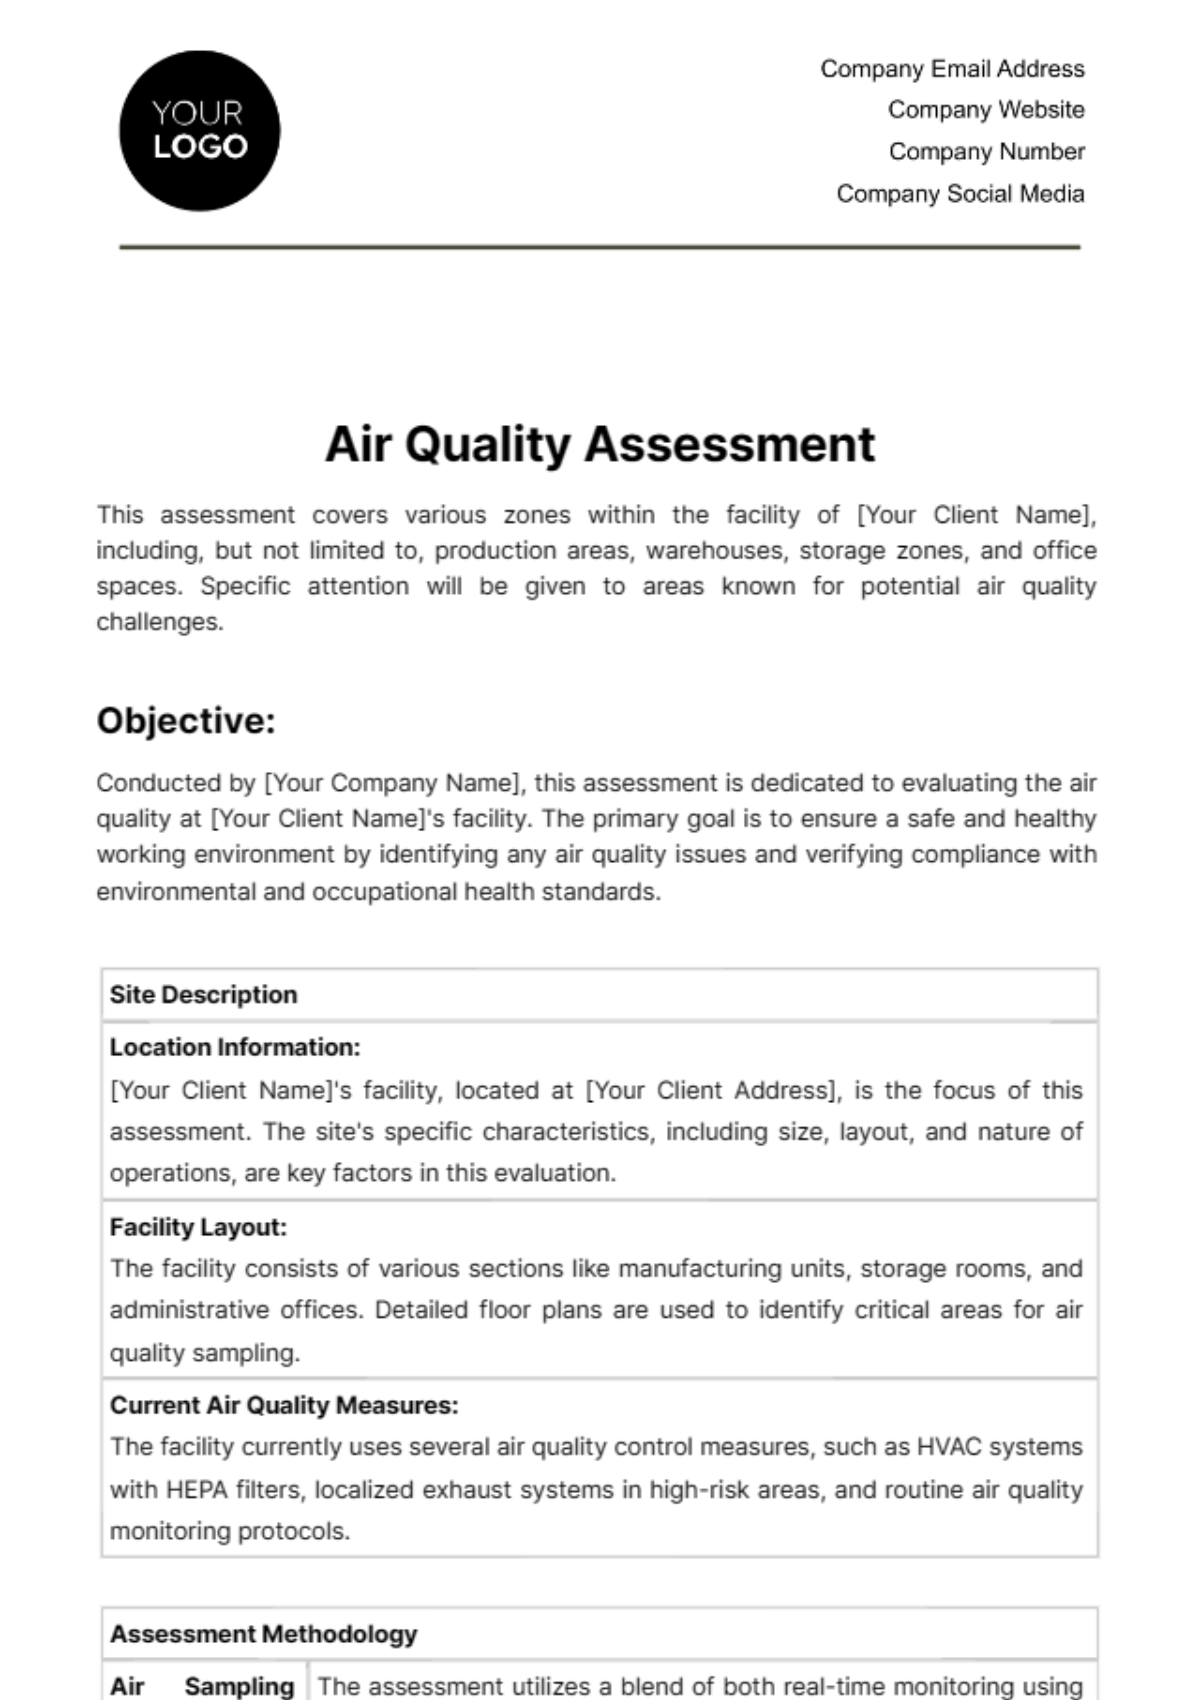 Air Quality Assessment Template